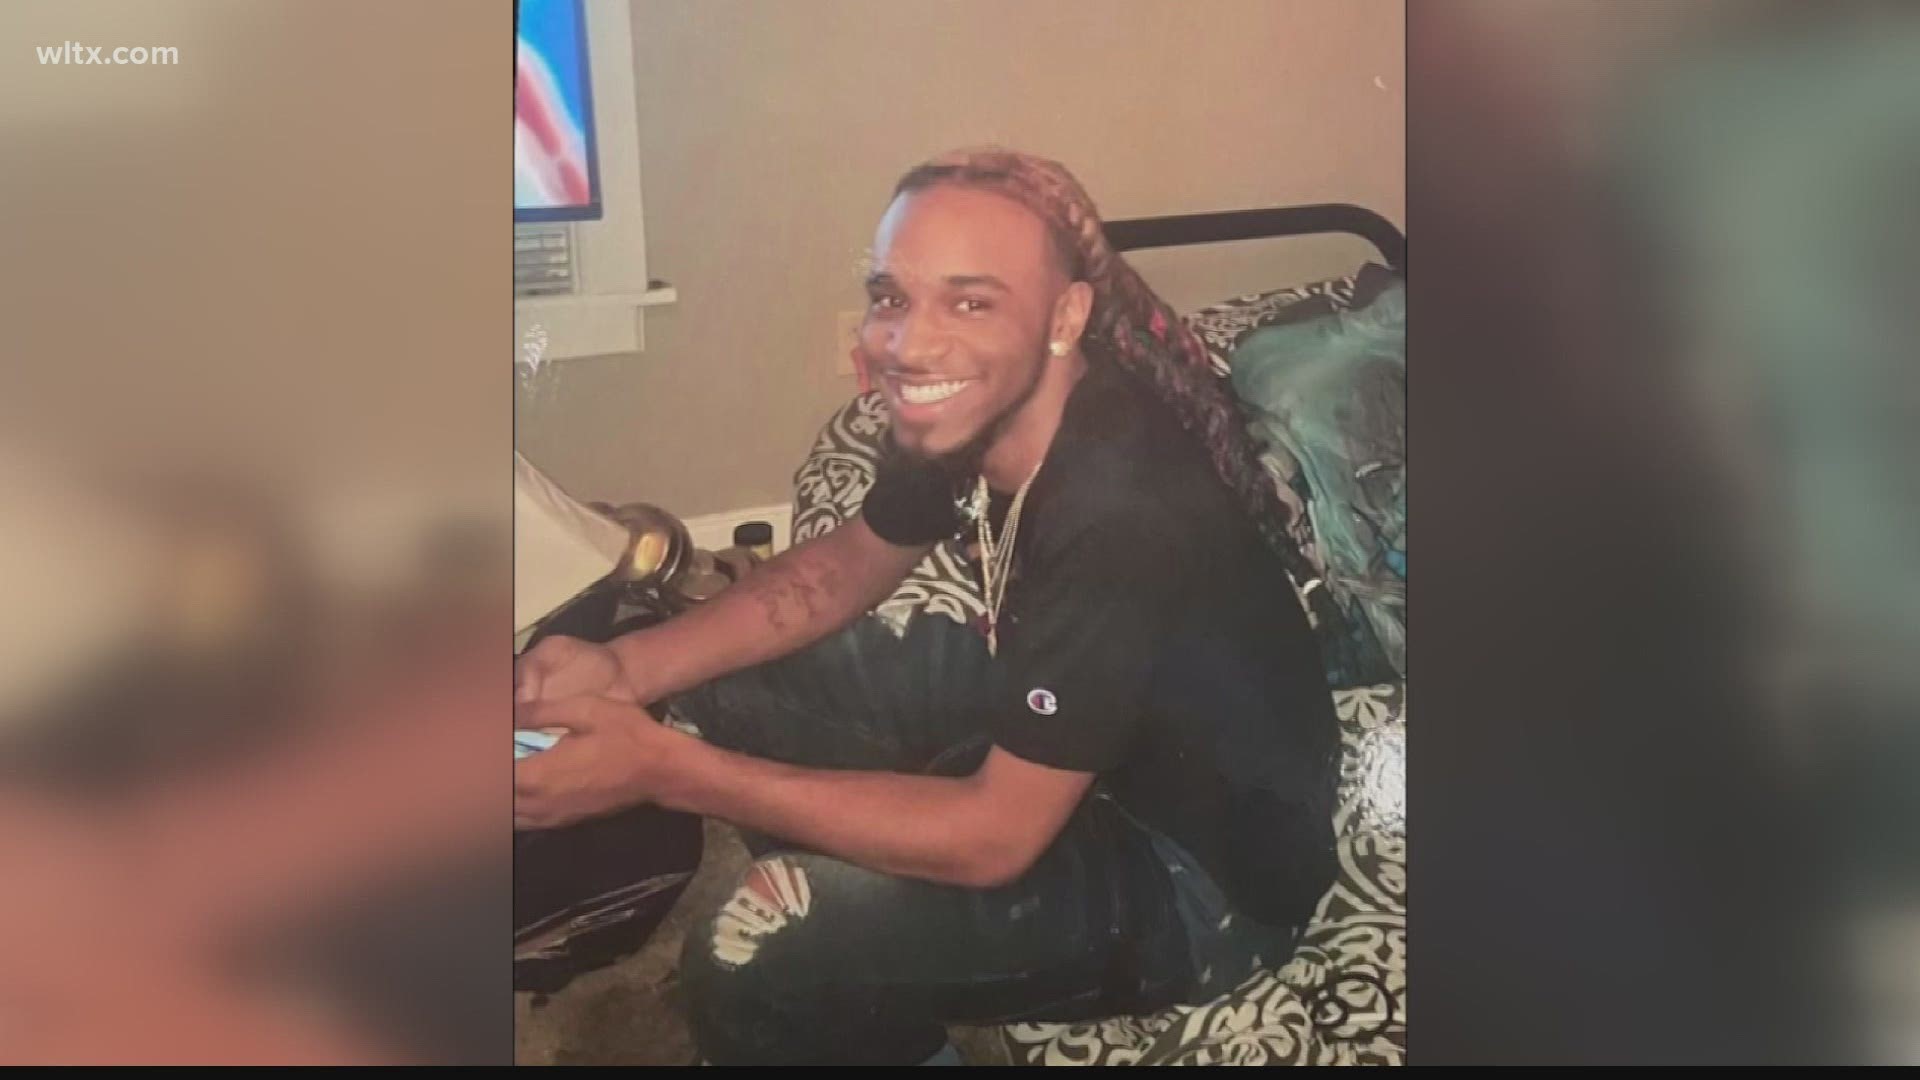 The mothers are looking for any help or information about their sons' deaths. Cayce law enforcement has images of vehicles that may be involved.